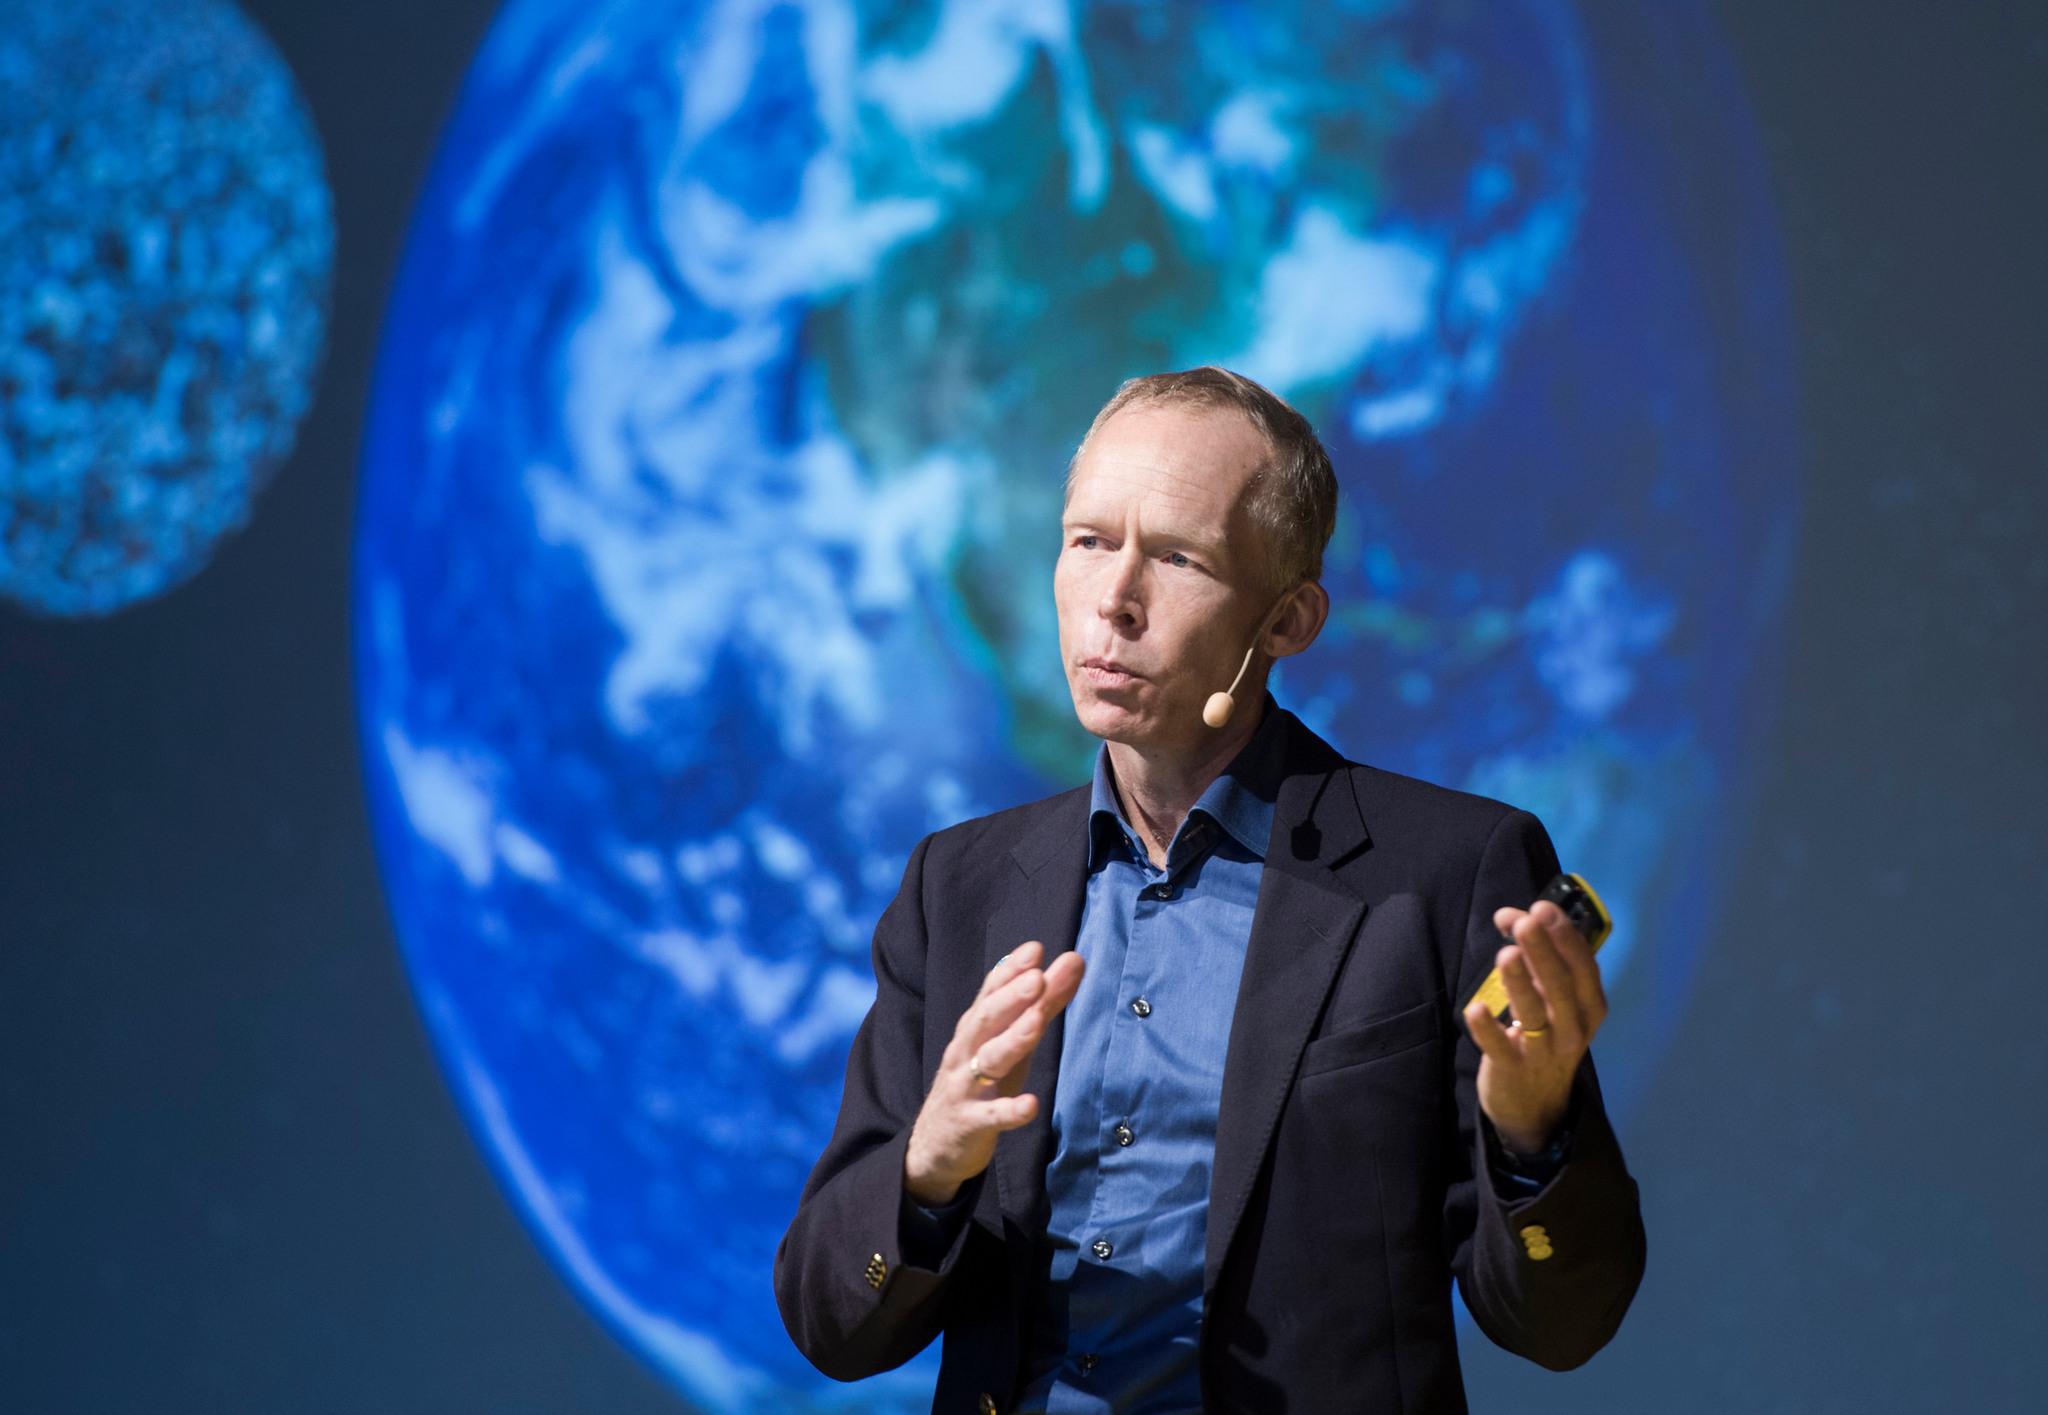 Professor Johan Rockström is gesticulating with his hands while speaking. Behind him is a blurred picture of Earth